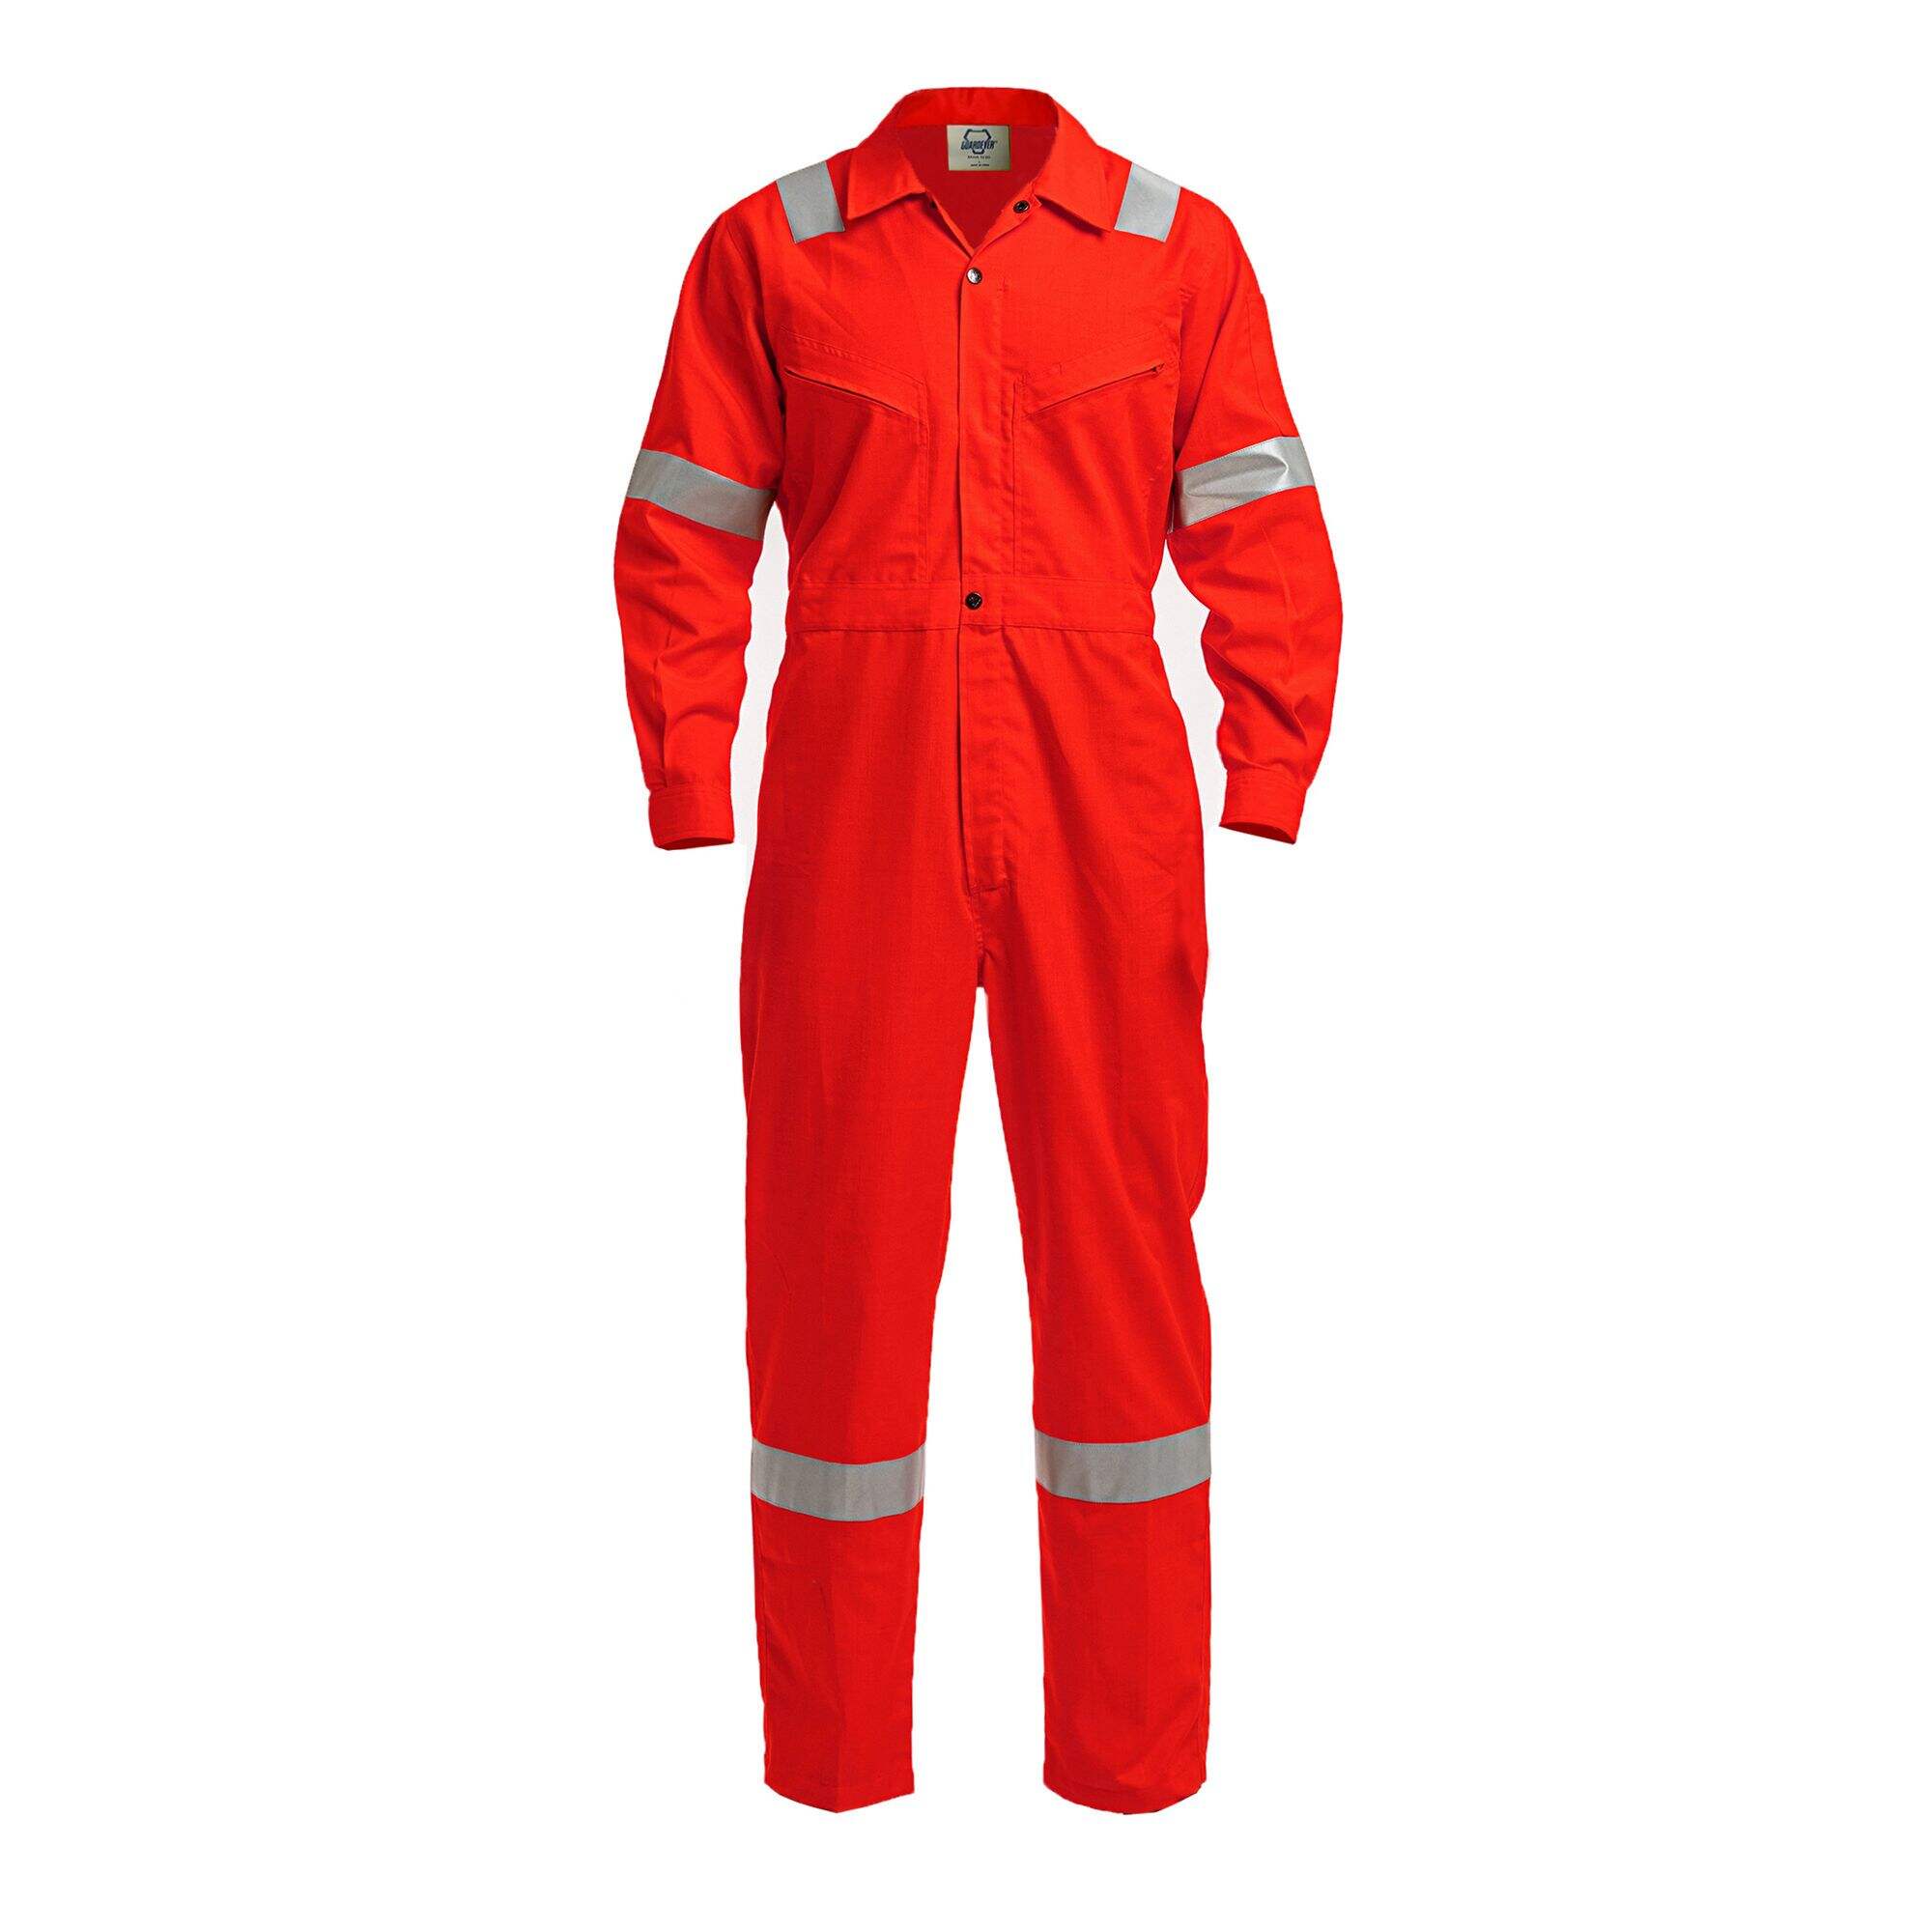 Custom Work Clothing Extreme Protect NFPA 2112 EN 11612 Nomex Aramid Inherent Fireproof FRC Fire retardant Coveralls For Men